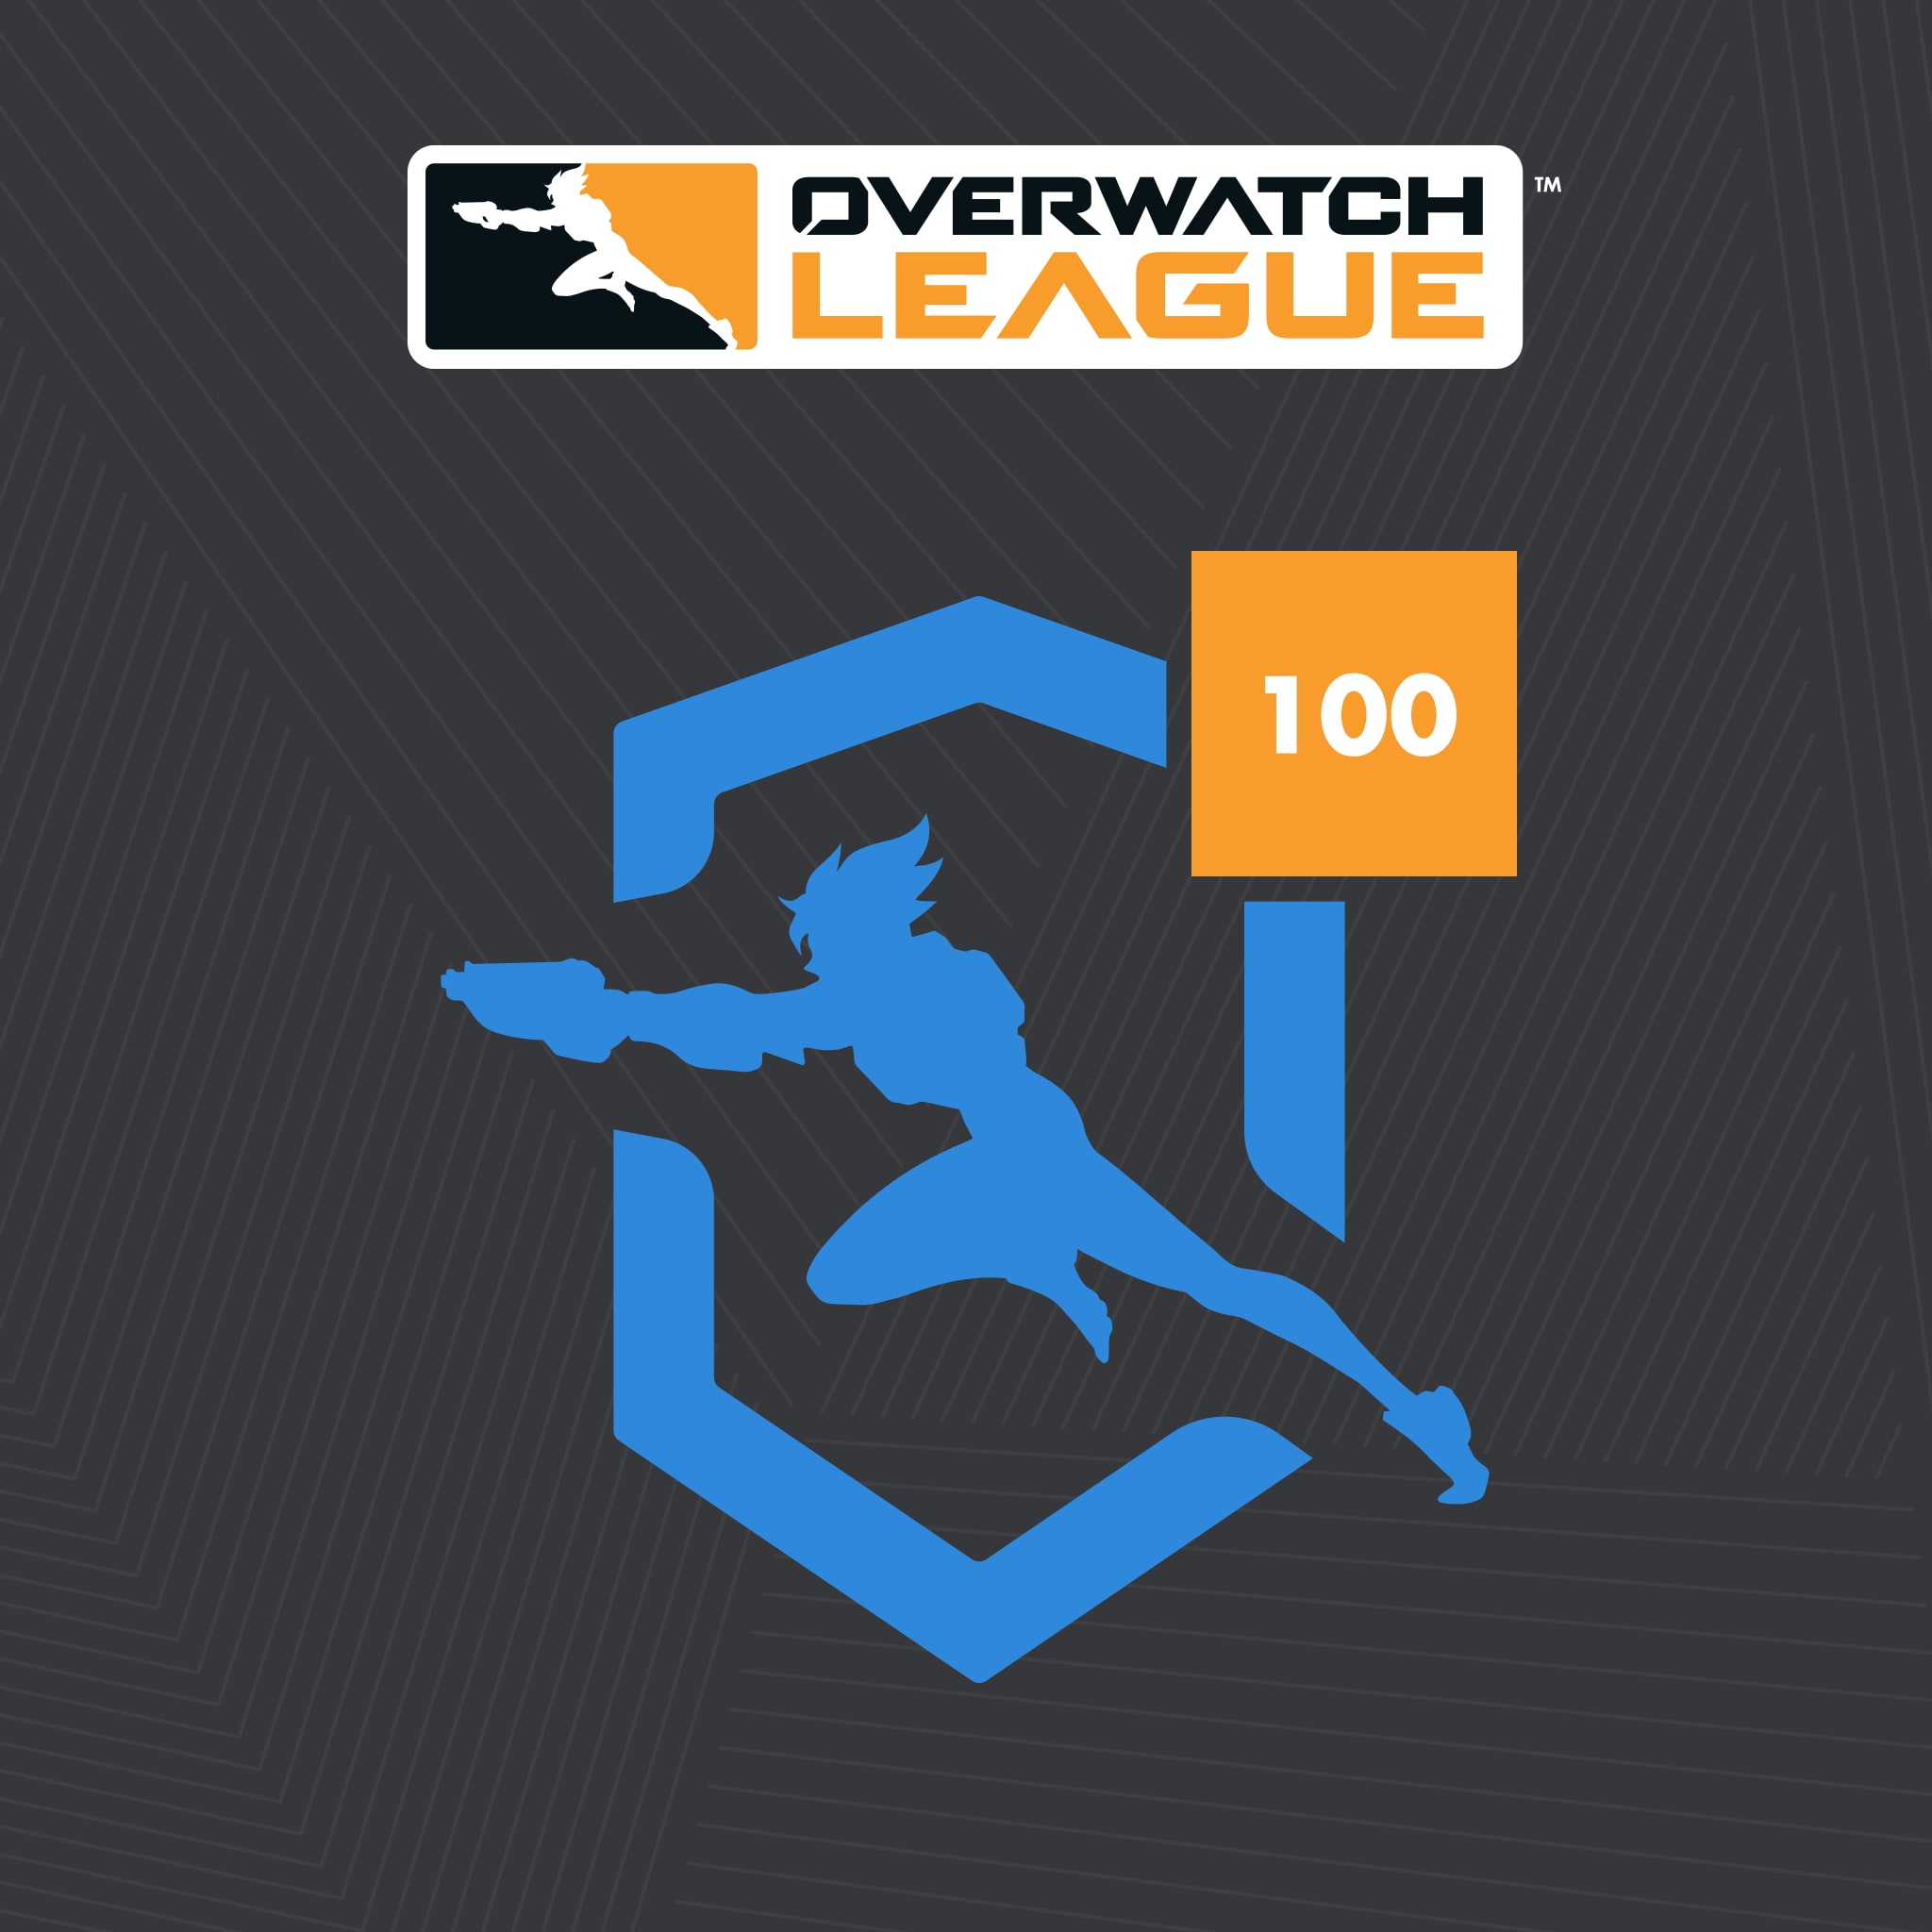 How To Get Overwatch League Tokens Free And Unlock OWL Skins In Overwatch 2